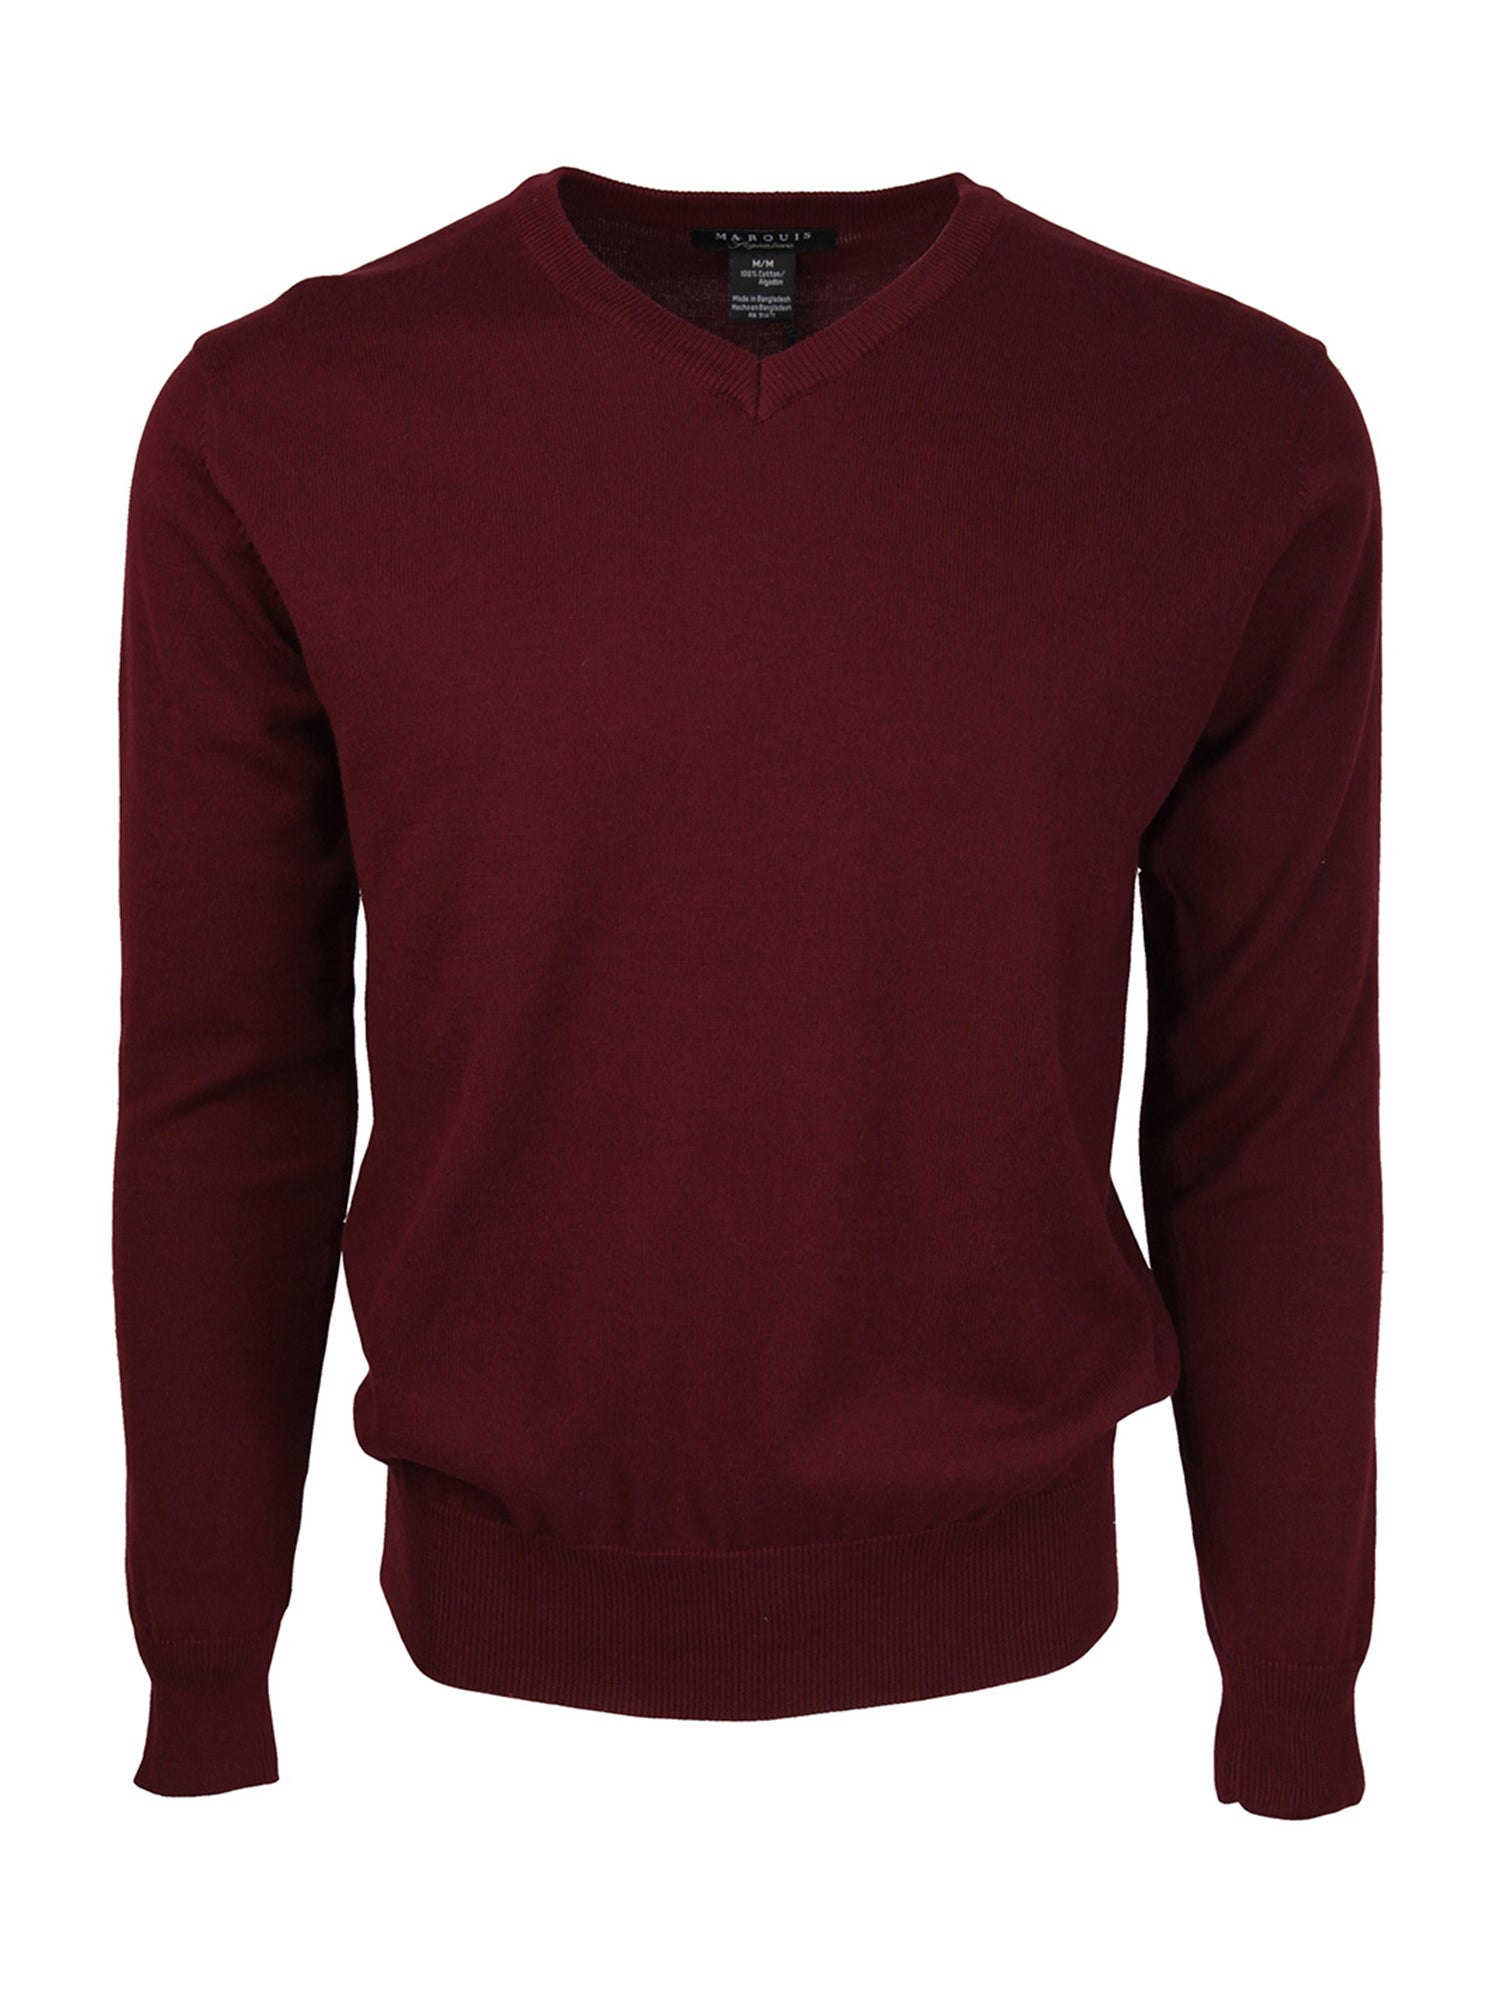 Men's Modern Fit Solid V-neck Cotton Sweater Sweater TheDapperTie Burgundy Small 